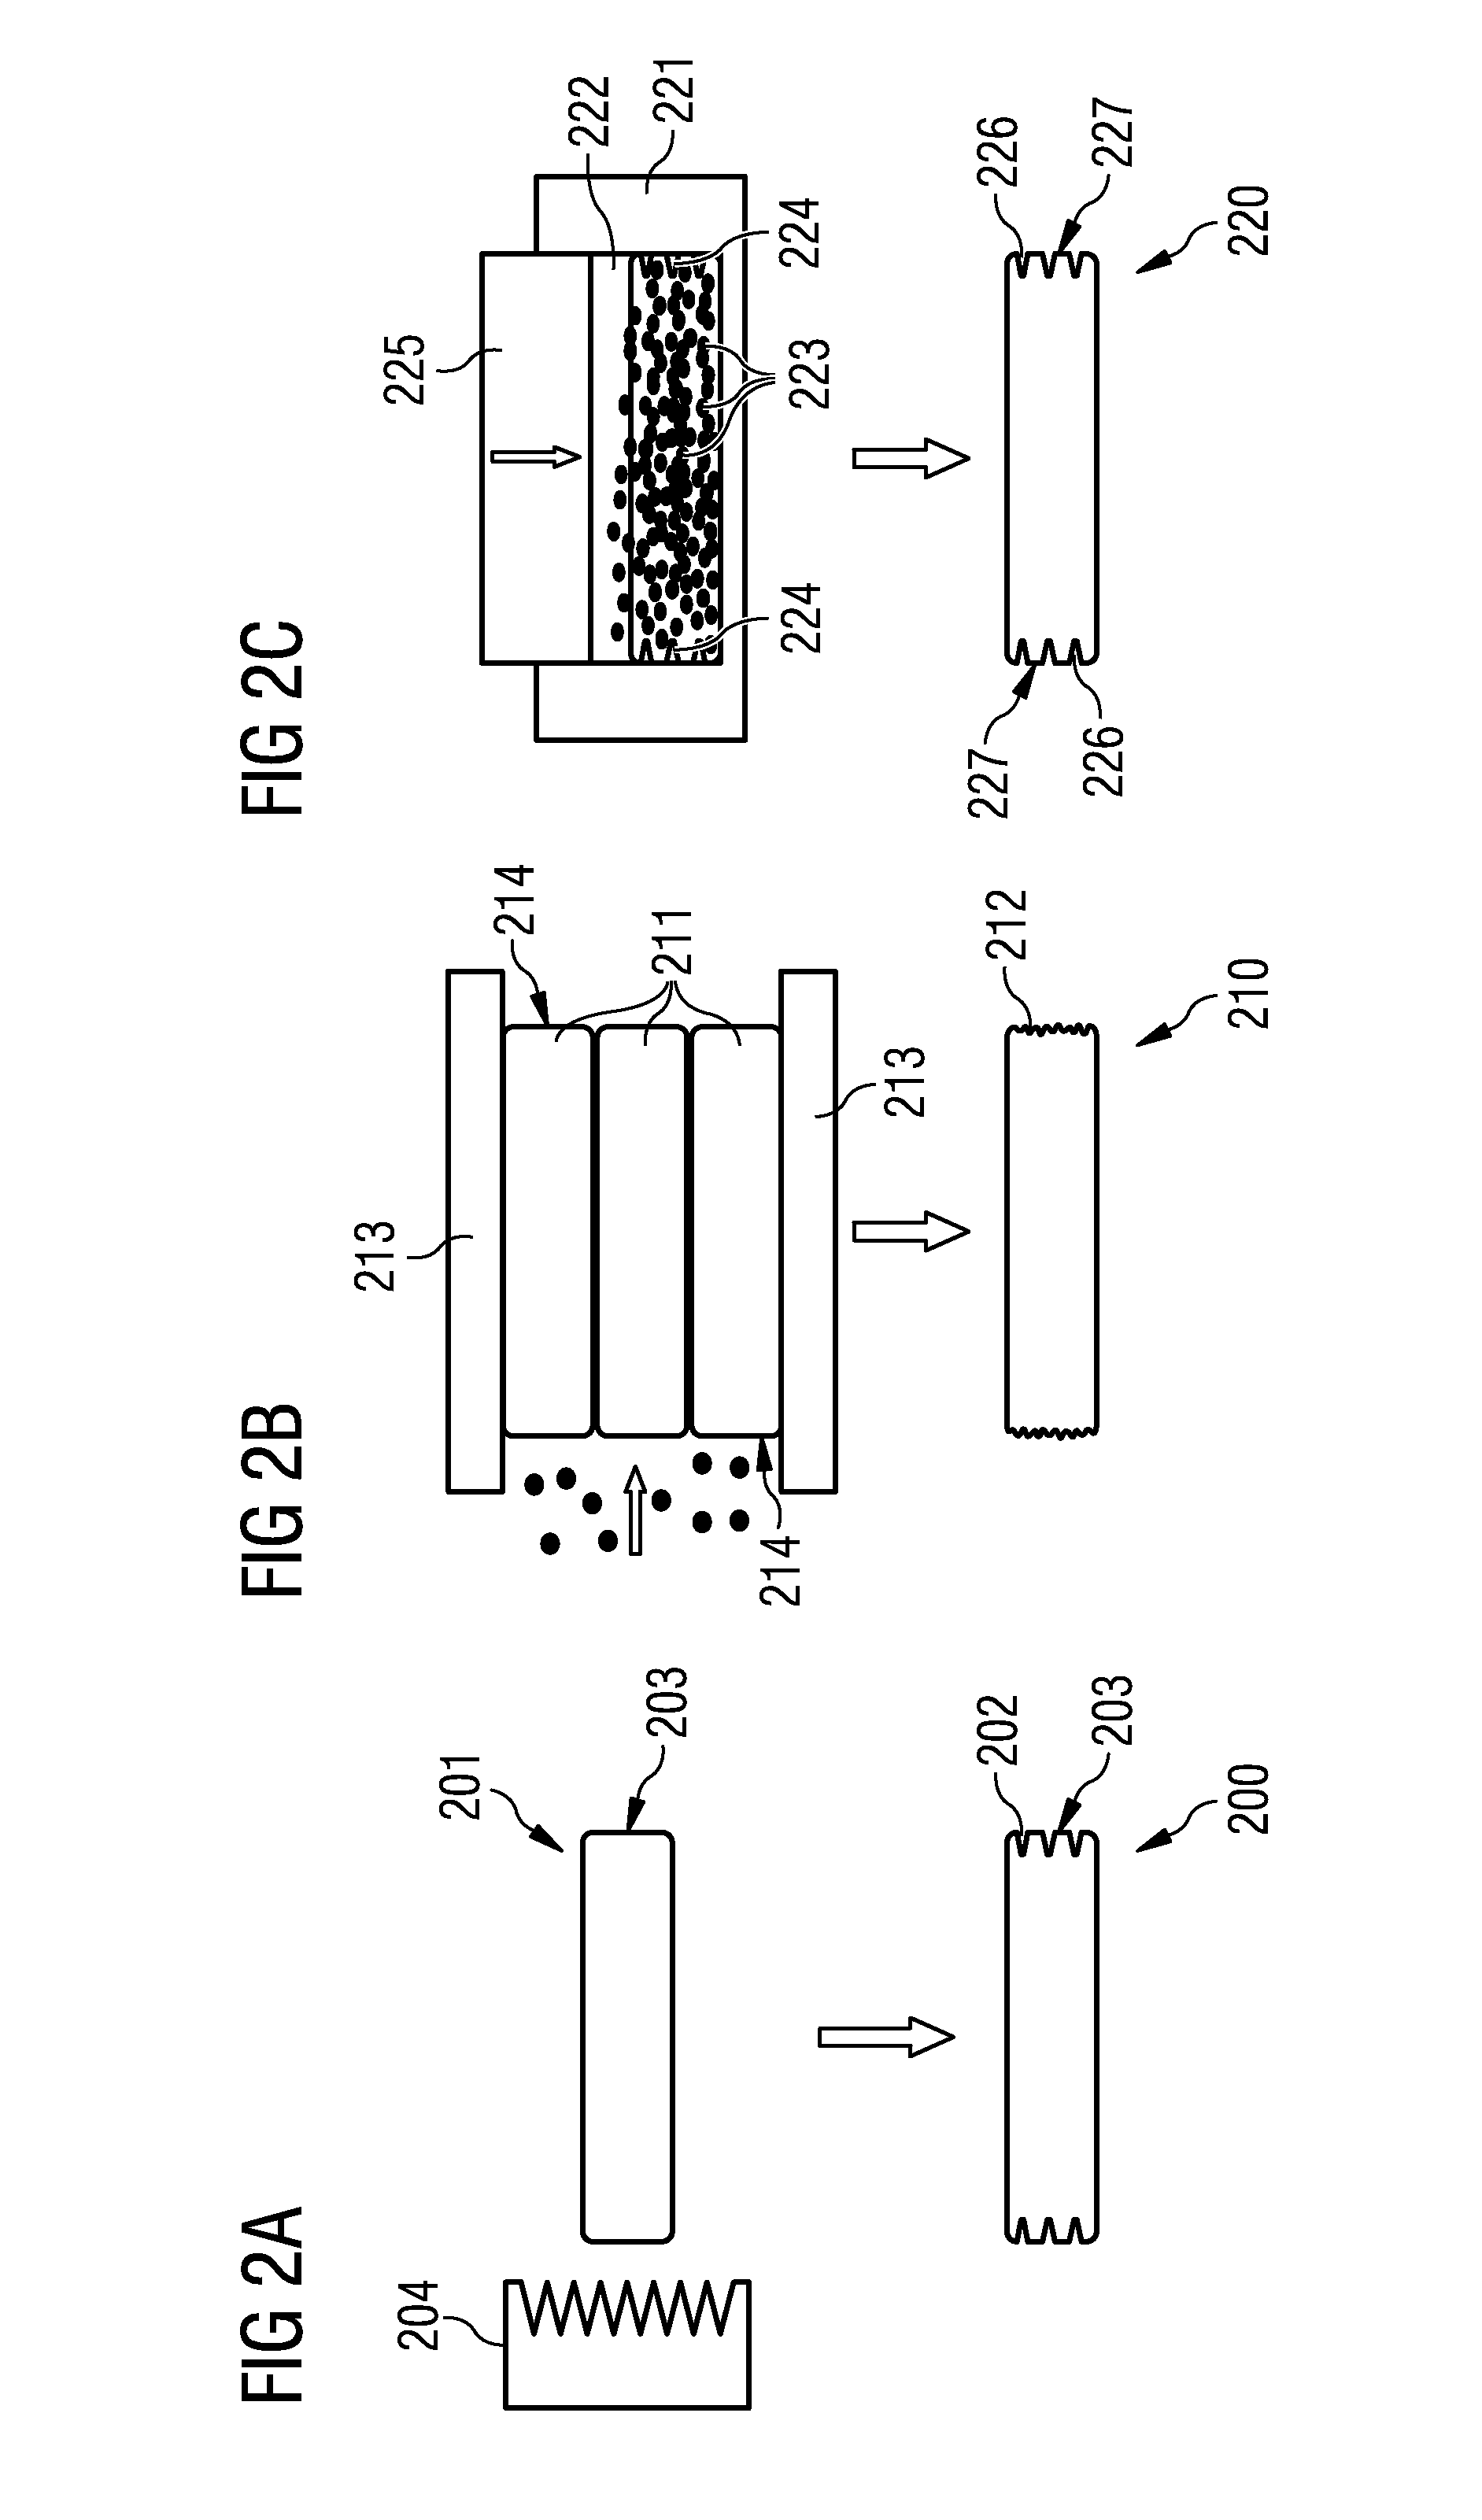 Electronic module and method of manufacturing the same